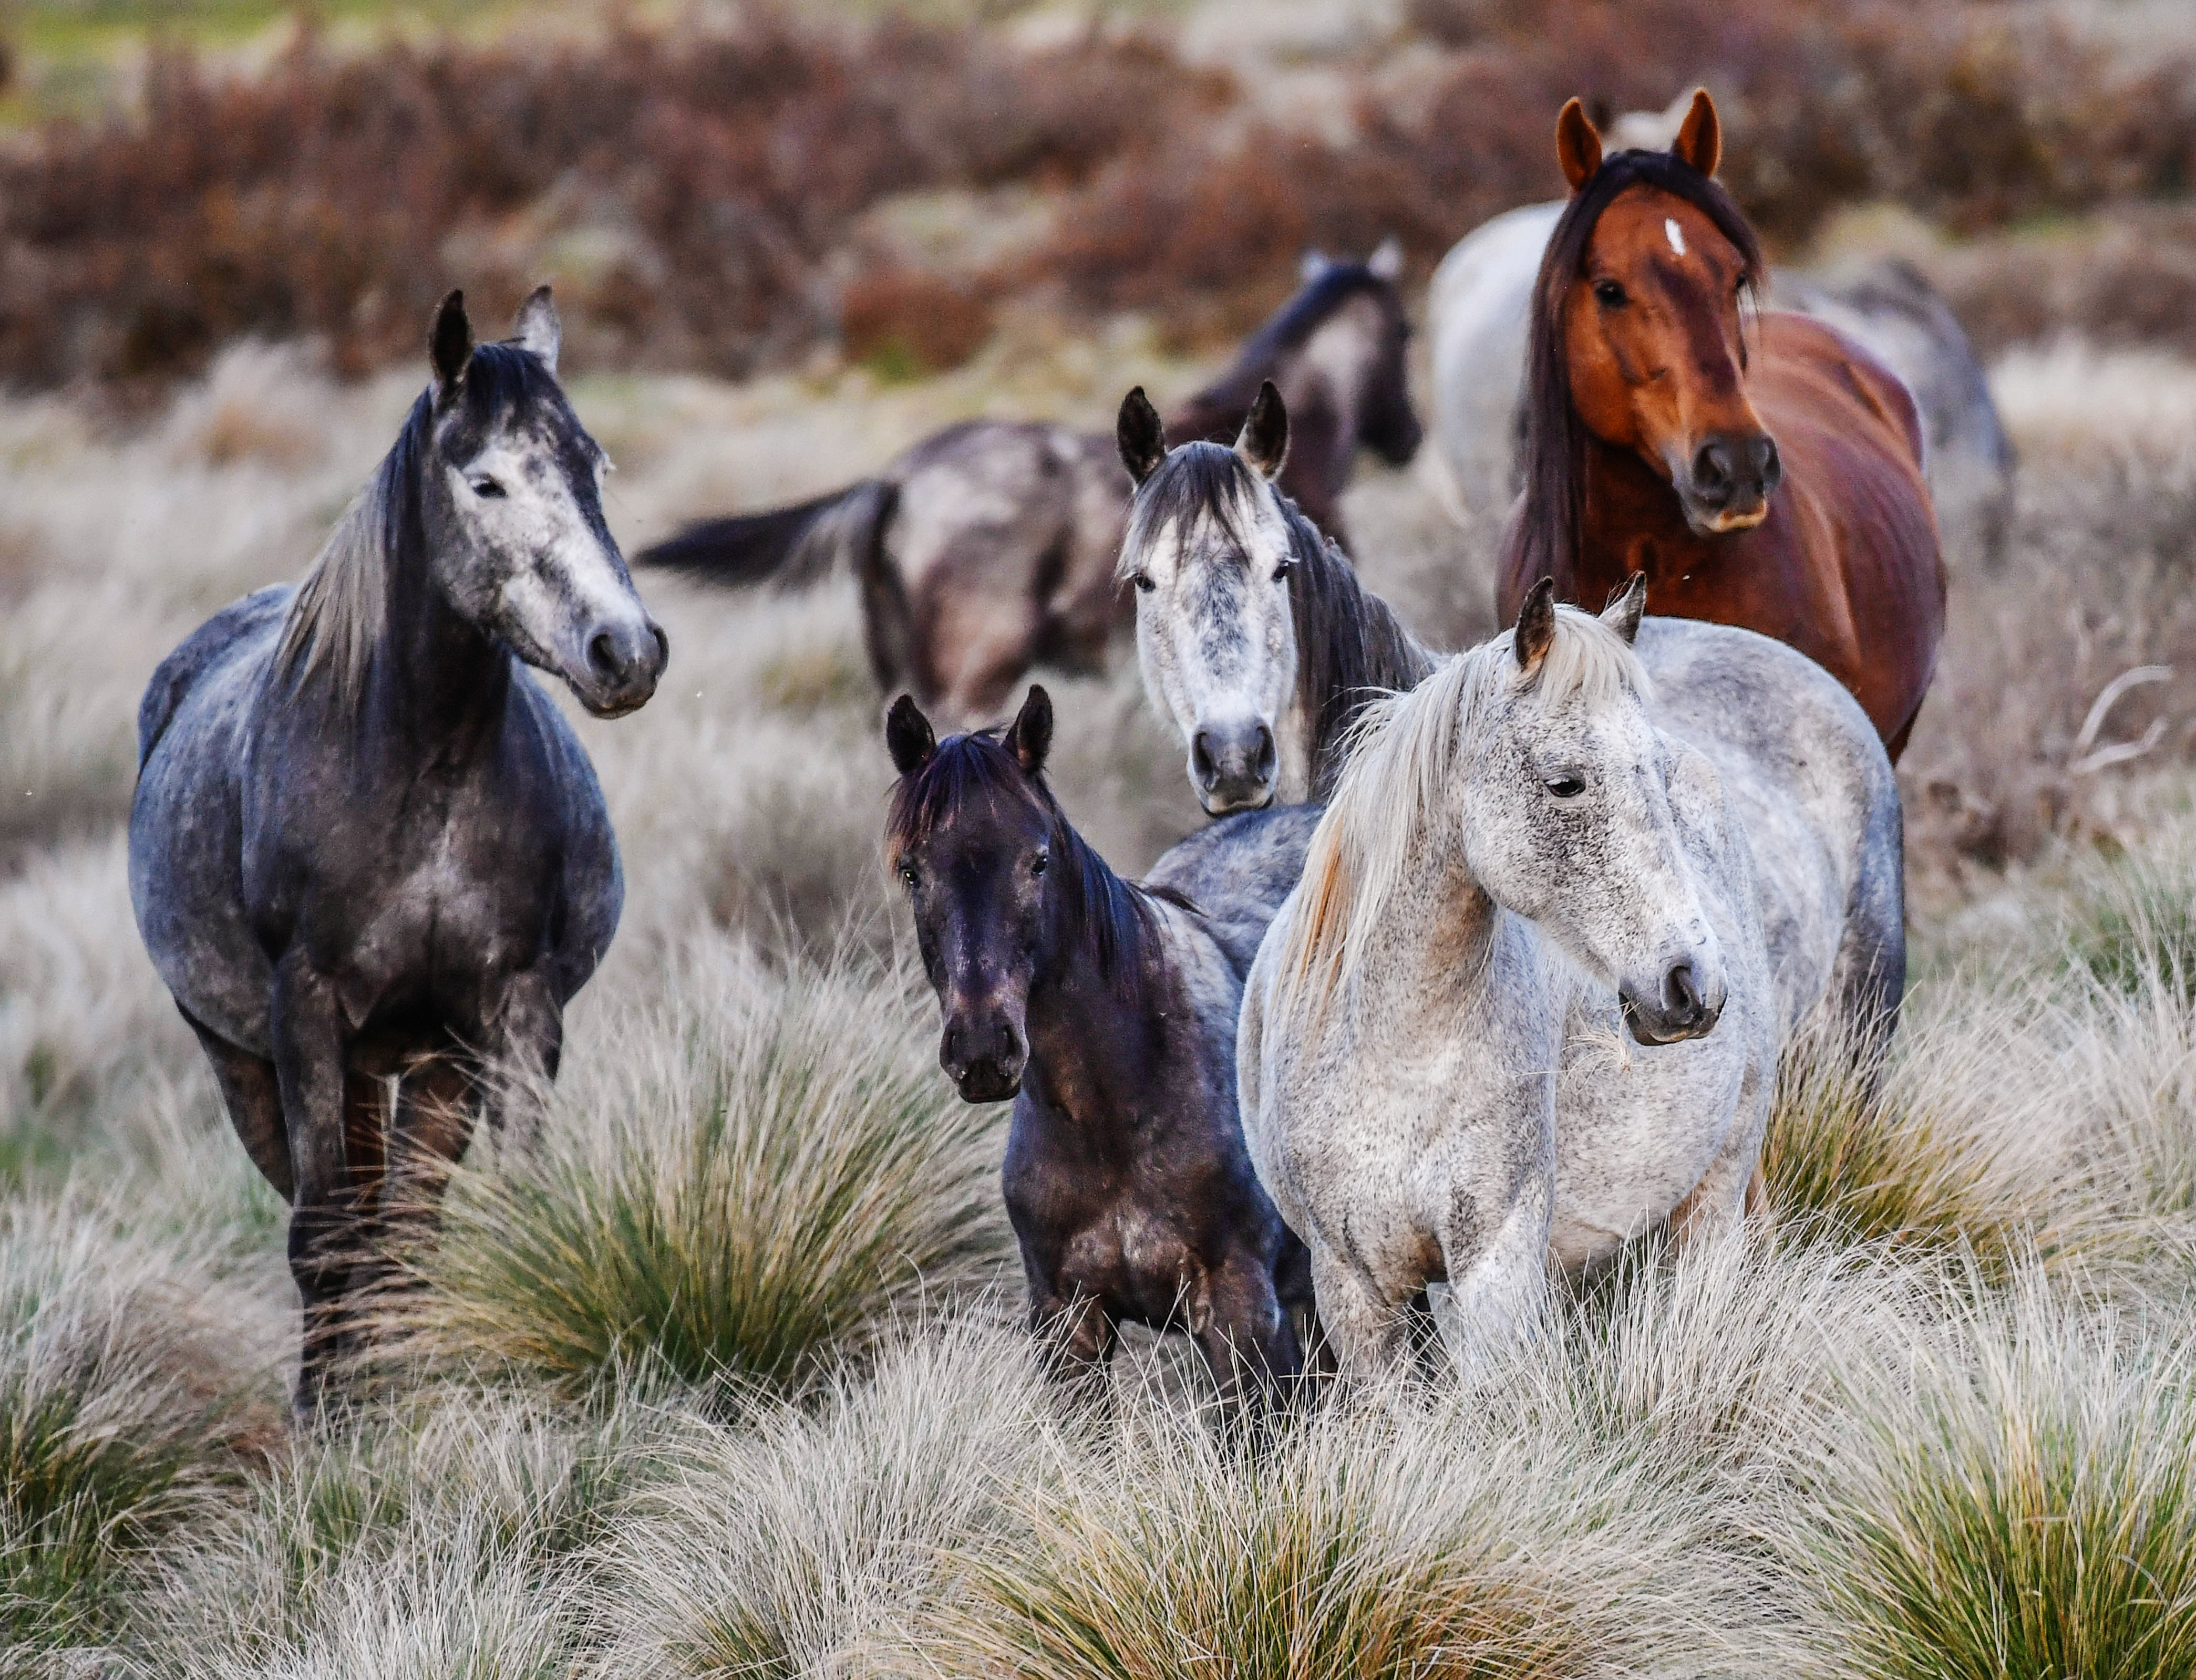 Brumby control update NSW government proposes aerial shooting to control brumby numbers